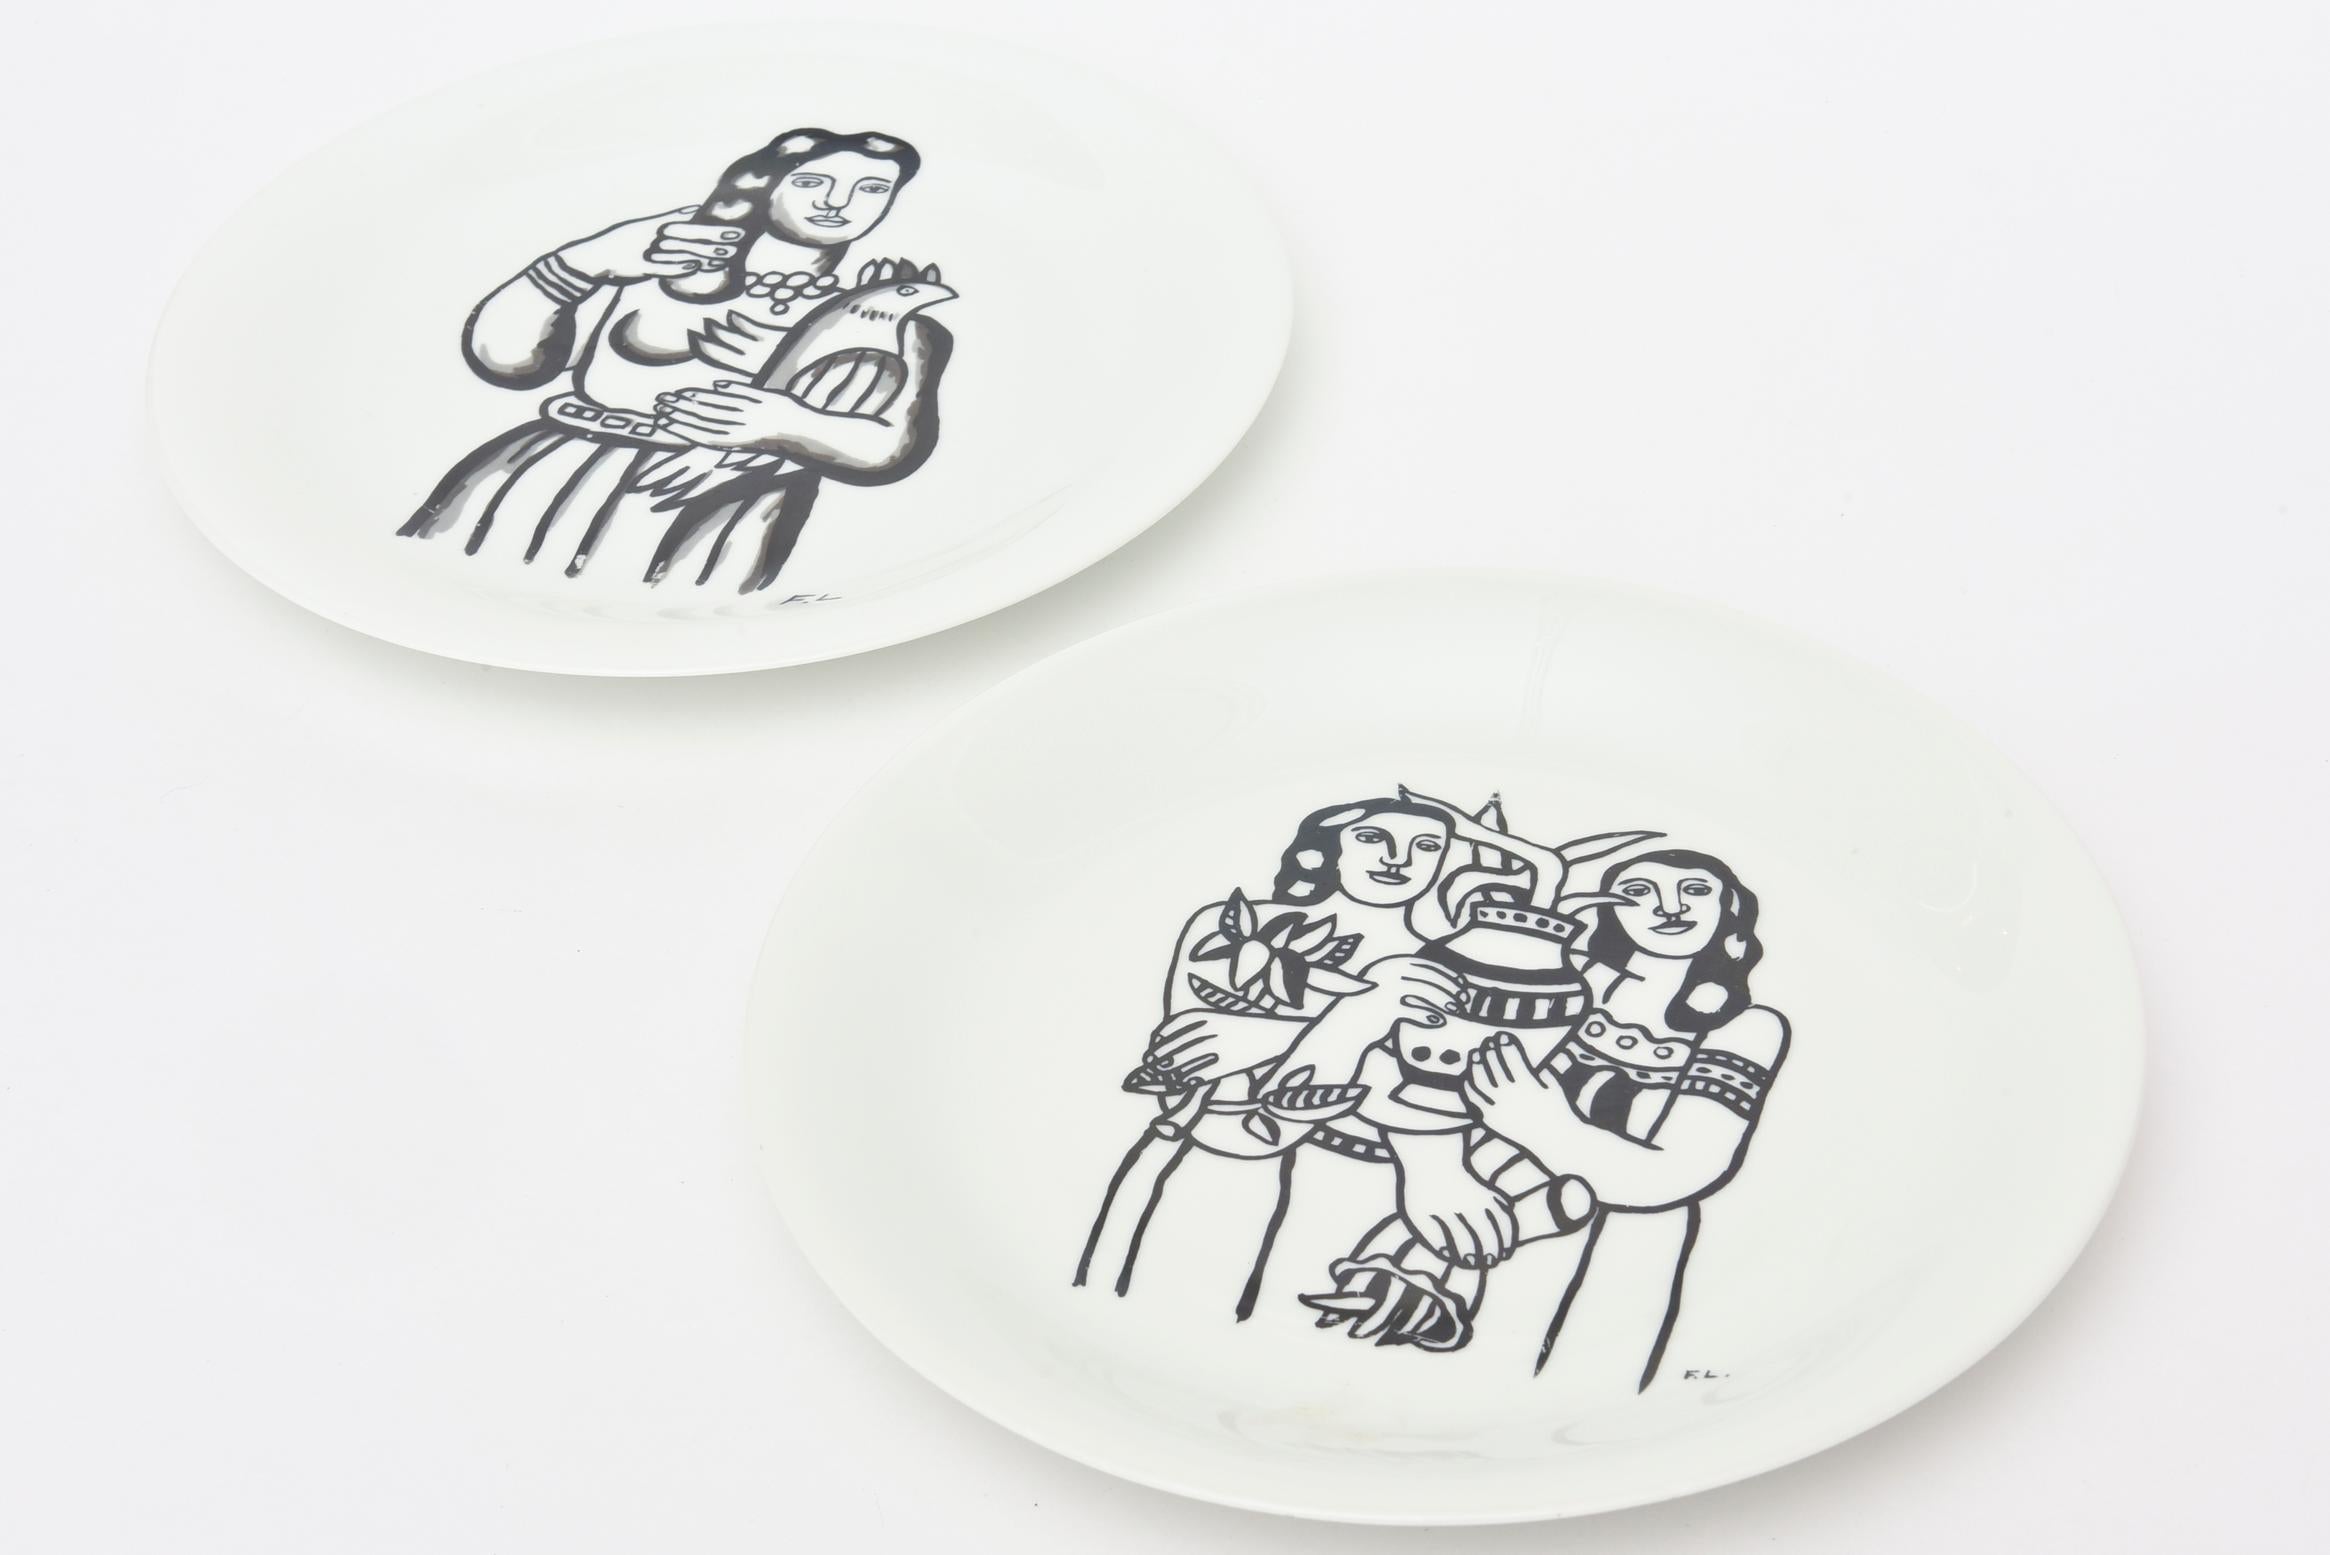 This pair of lithographic black and white Porcelain plates is by a design after Leger manufactured by Limoges France. They are vintage from the 70's. There are 2 different images and these could be used for serving or hanging. They can also be